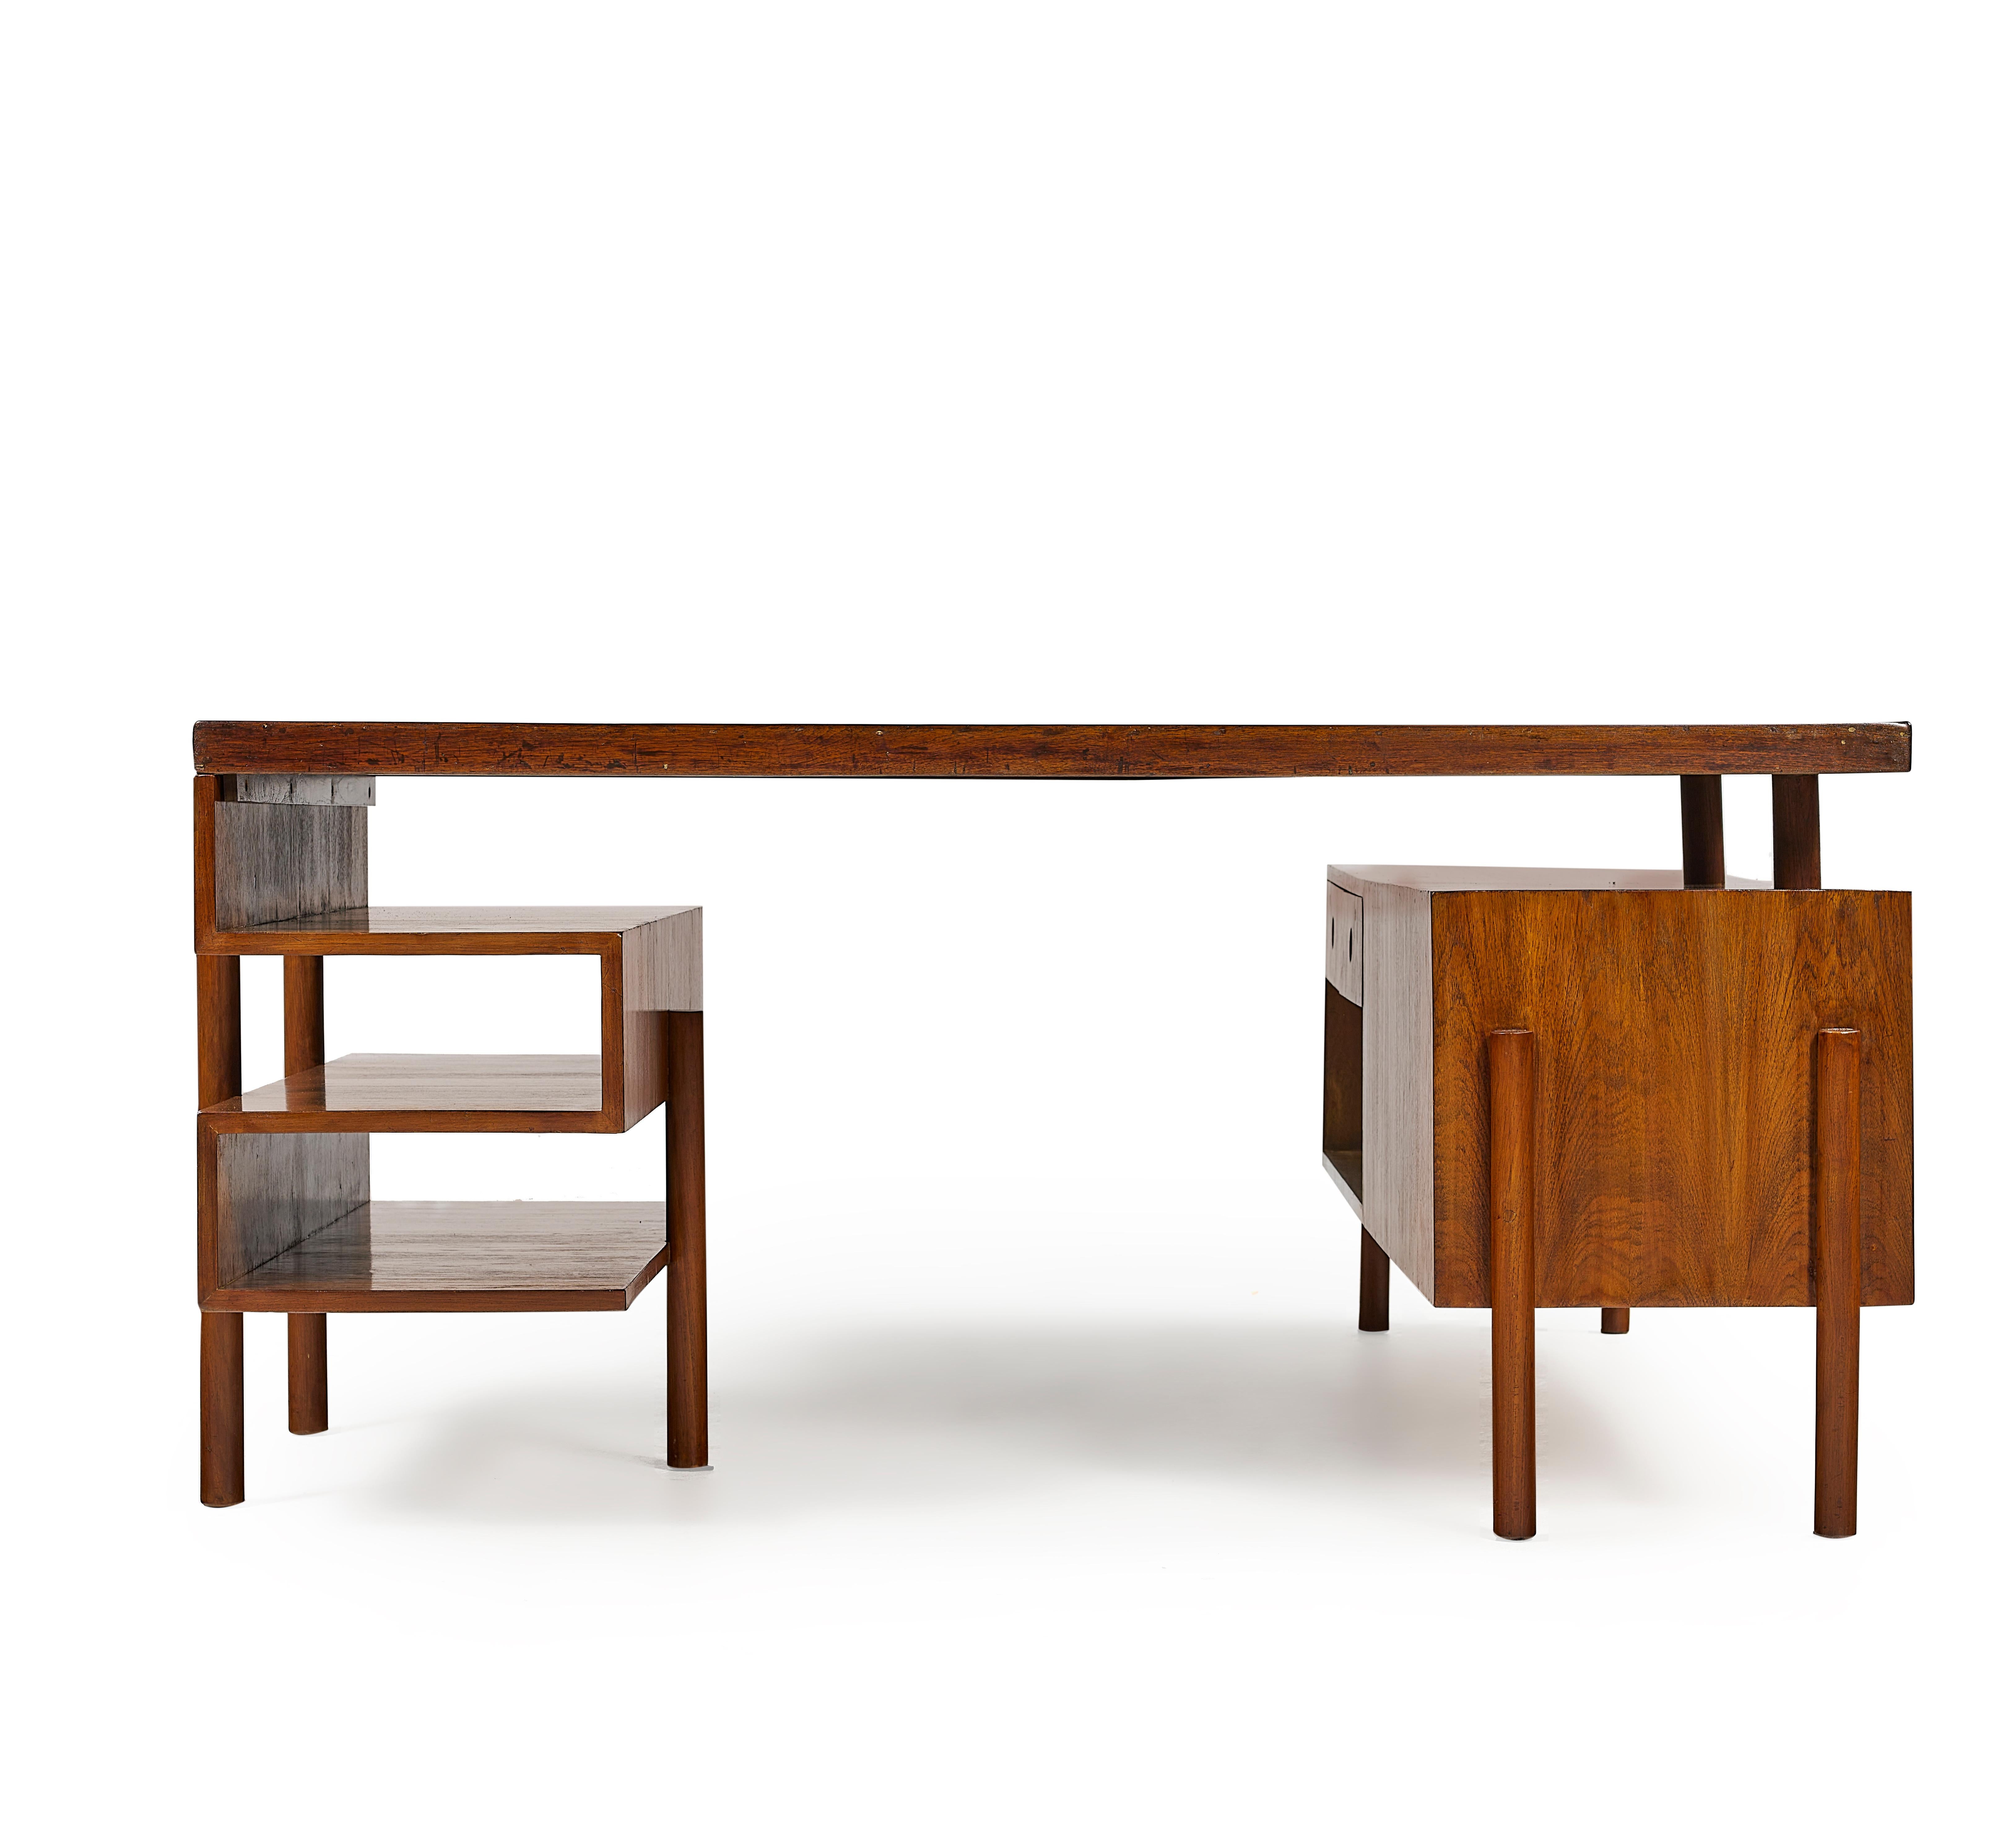 Indian Pierre Jeanneret, Office Table PJ-BU-16-A, circa 1957 For Sale